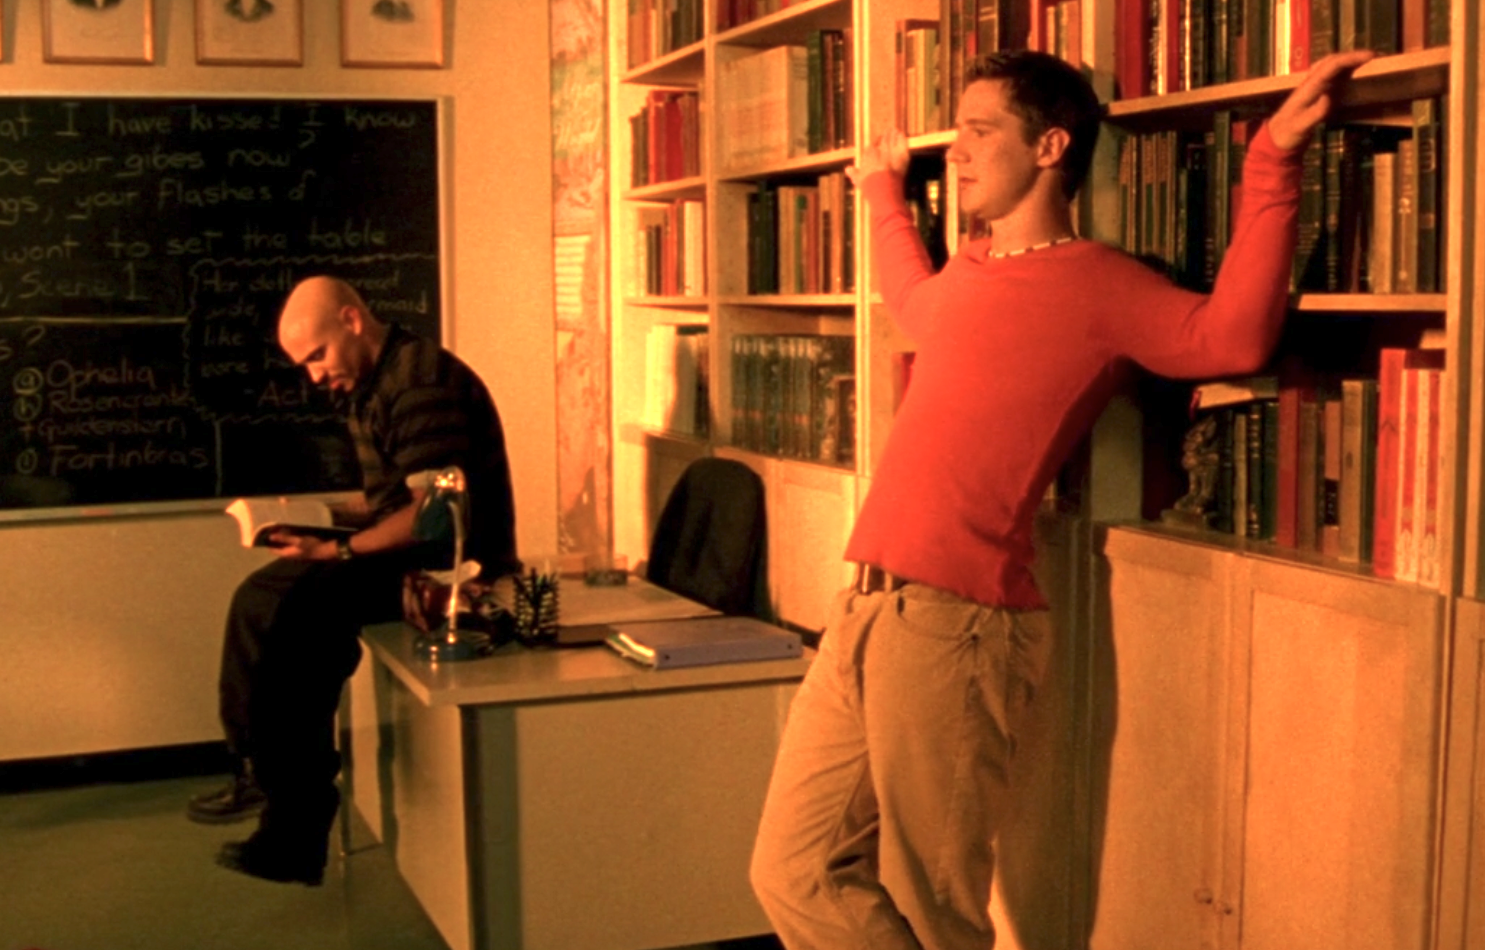 Screenshot from S1E7 of Veronica Mars. Weevil is in the background dressed in black, reading a book while sitting on a desk. Logan is in the foreground in an orange shirt, his arms raised to the sides and leaning on the bookshelf behind him.